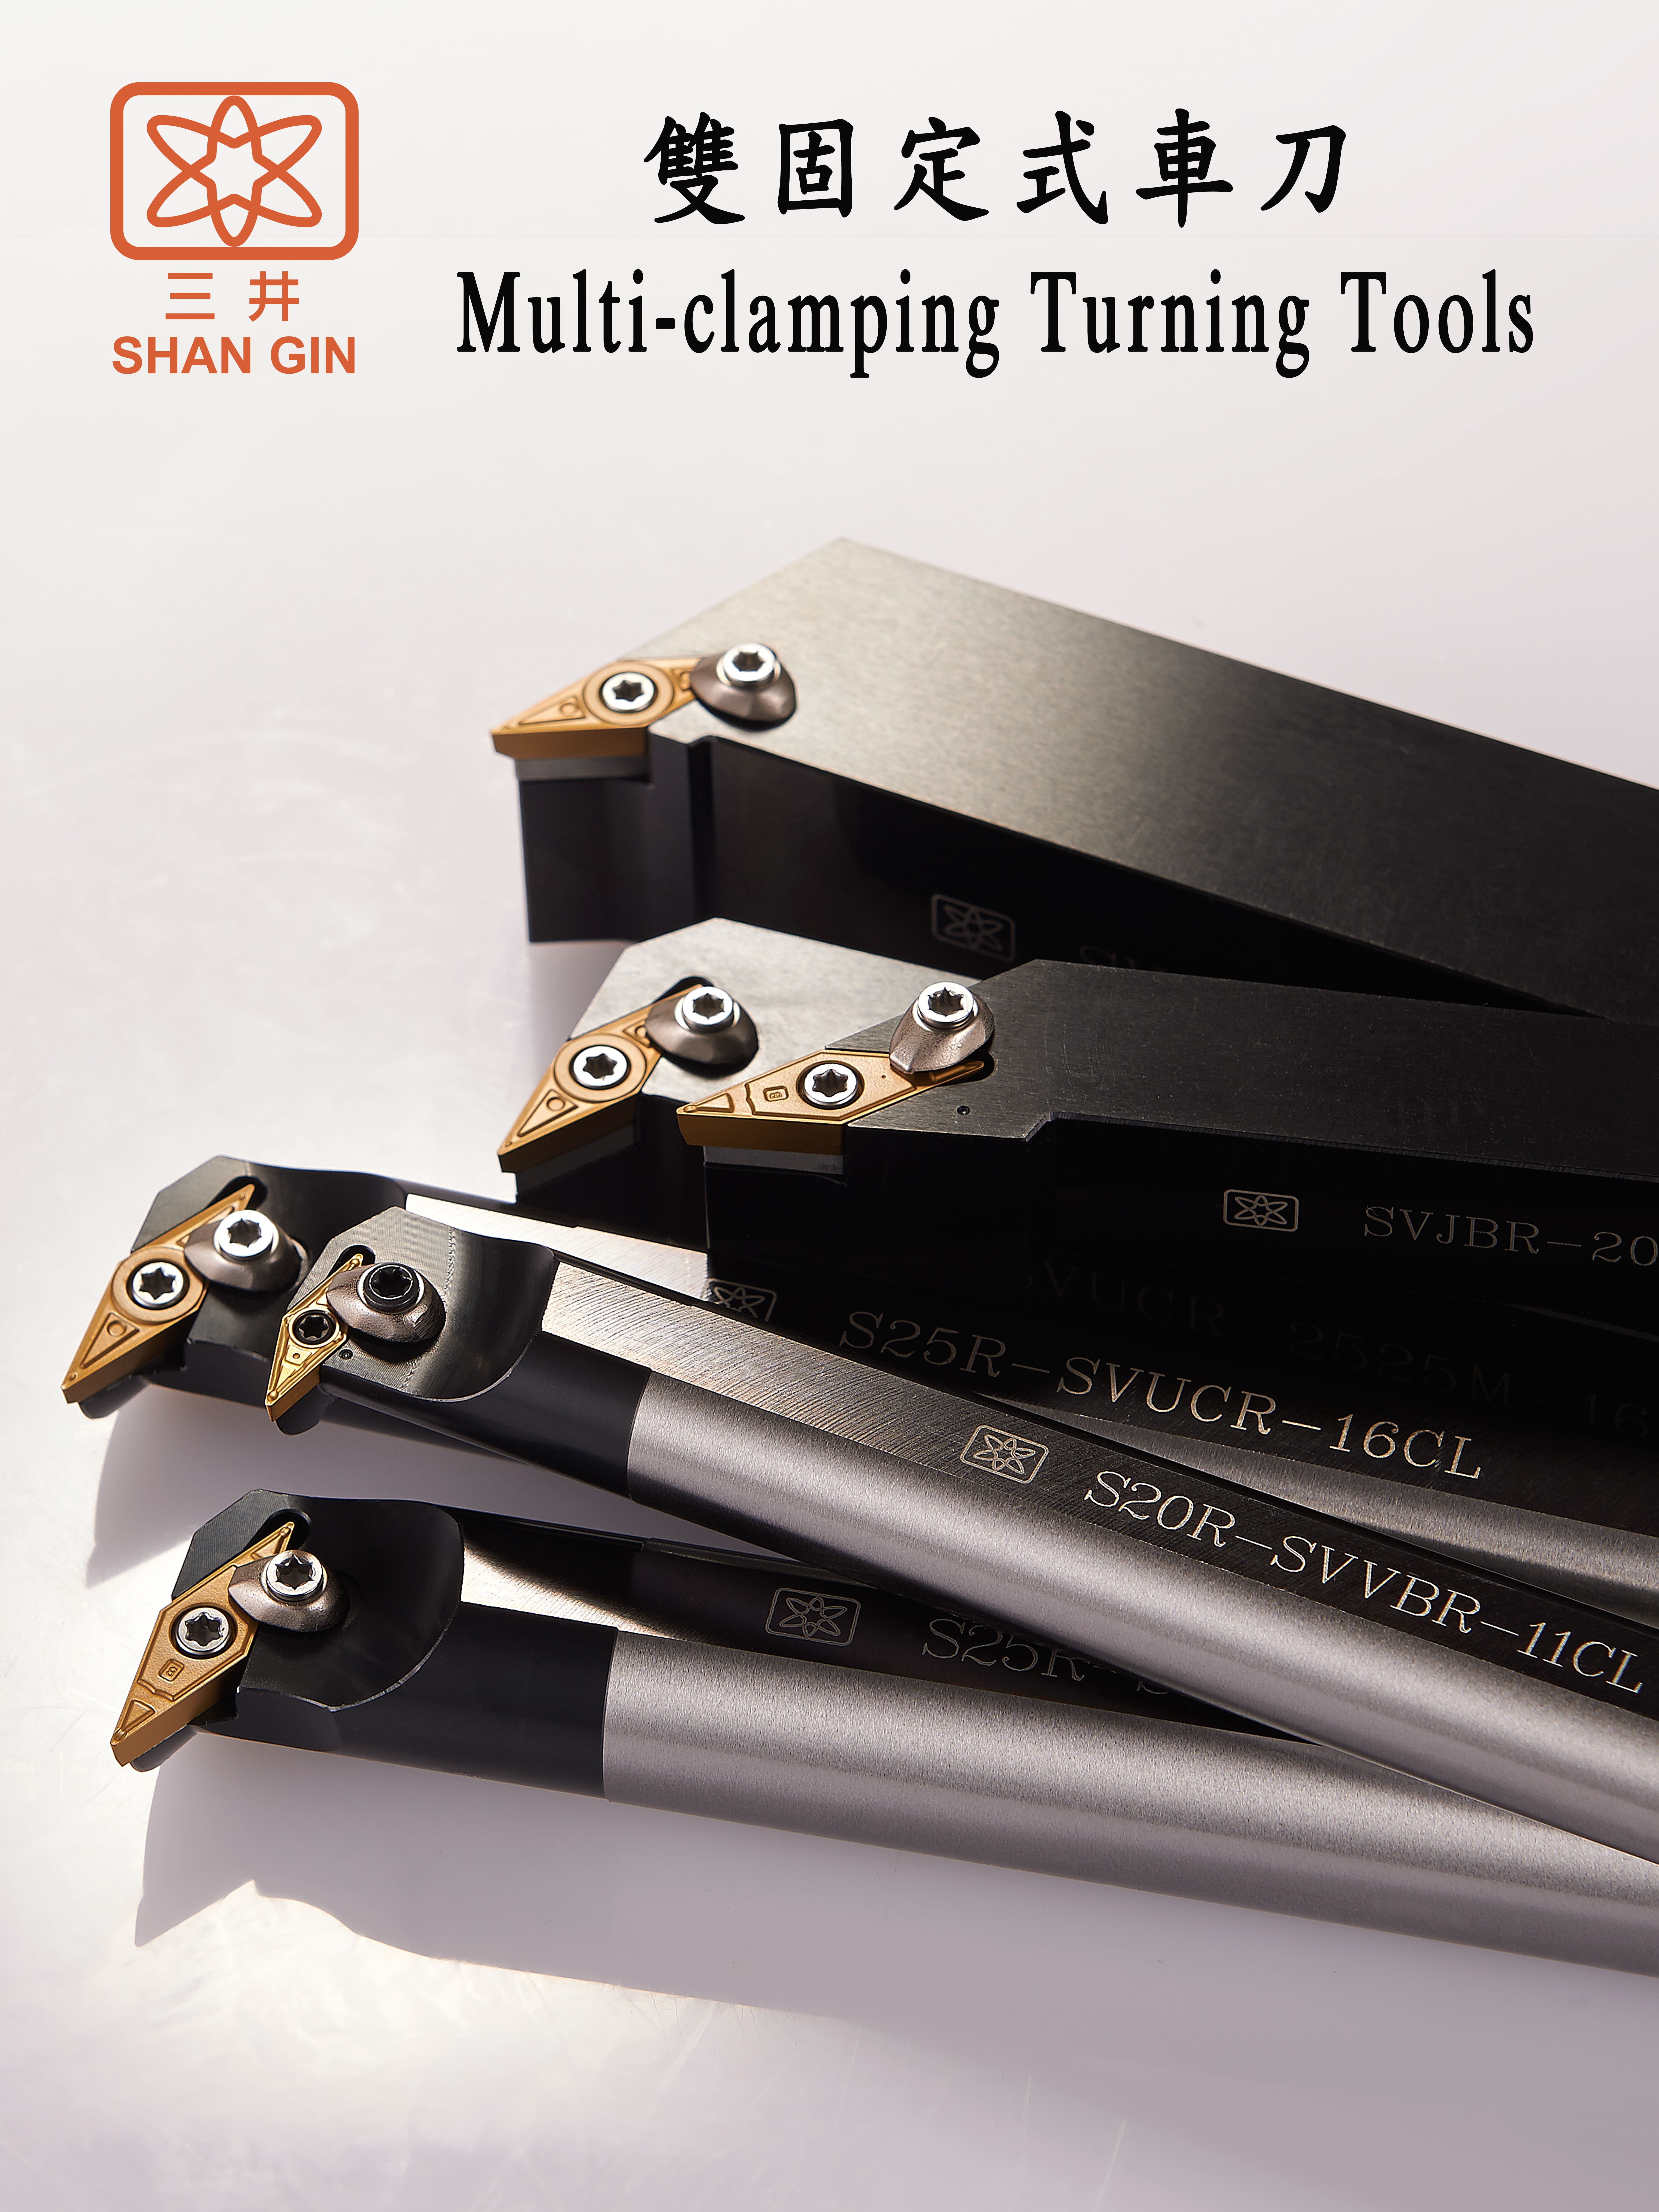 Products|Multi-clamping Turning Tools